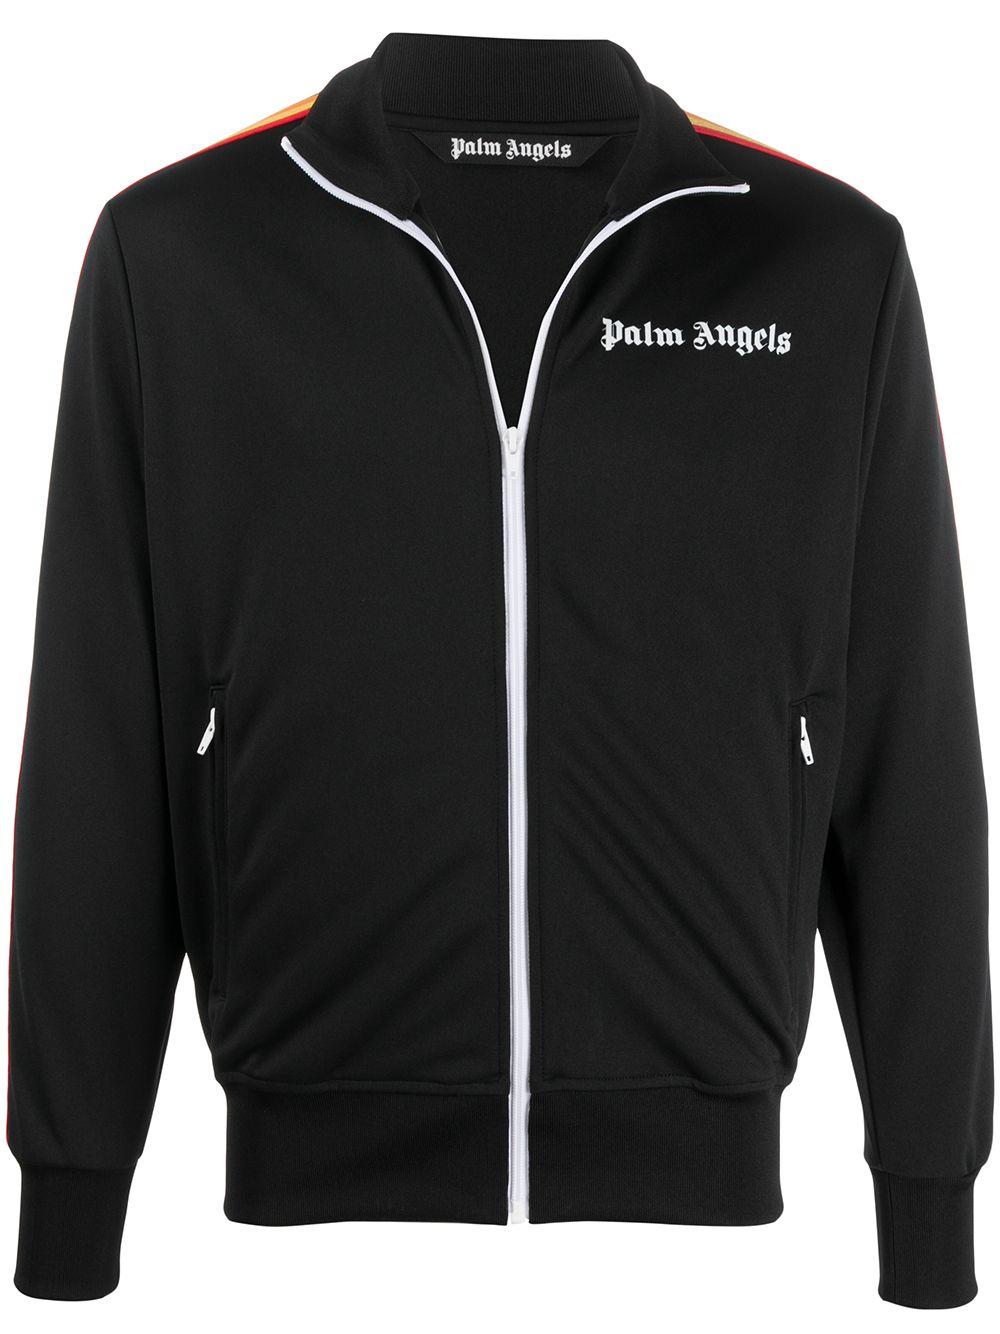 Palm Angels Synthetic Logo Print Track Jacket in Black for Men - Lyst